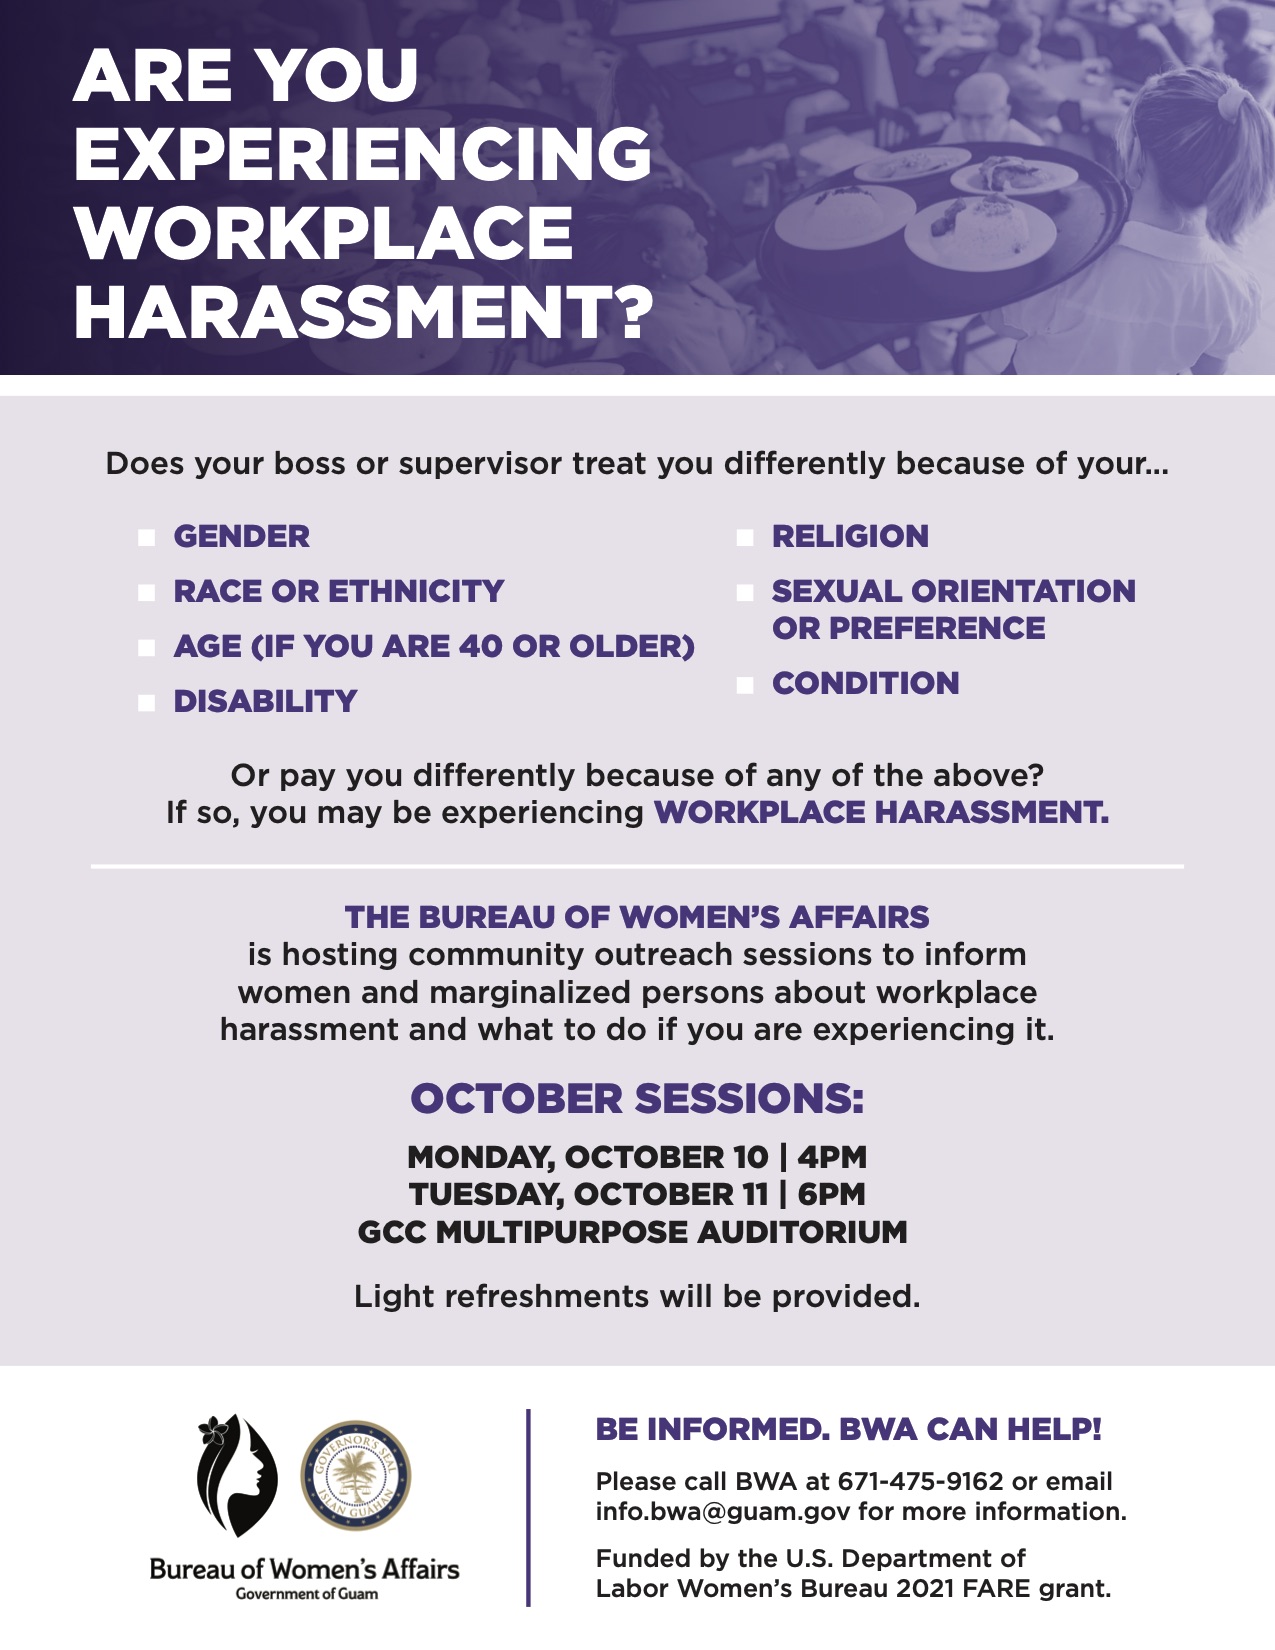 bwa_workplace_harassment_flyer_oct._meetings.jpg